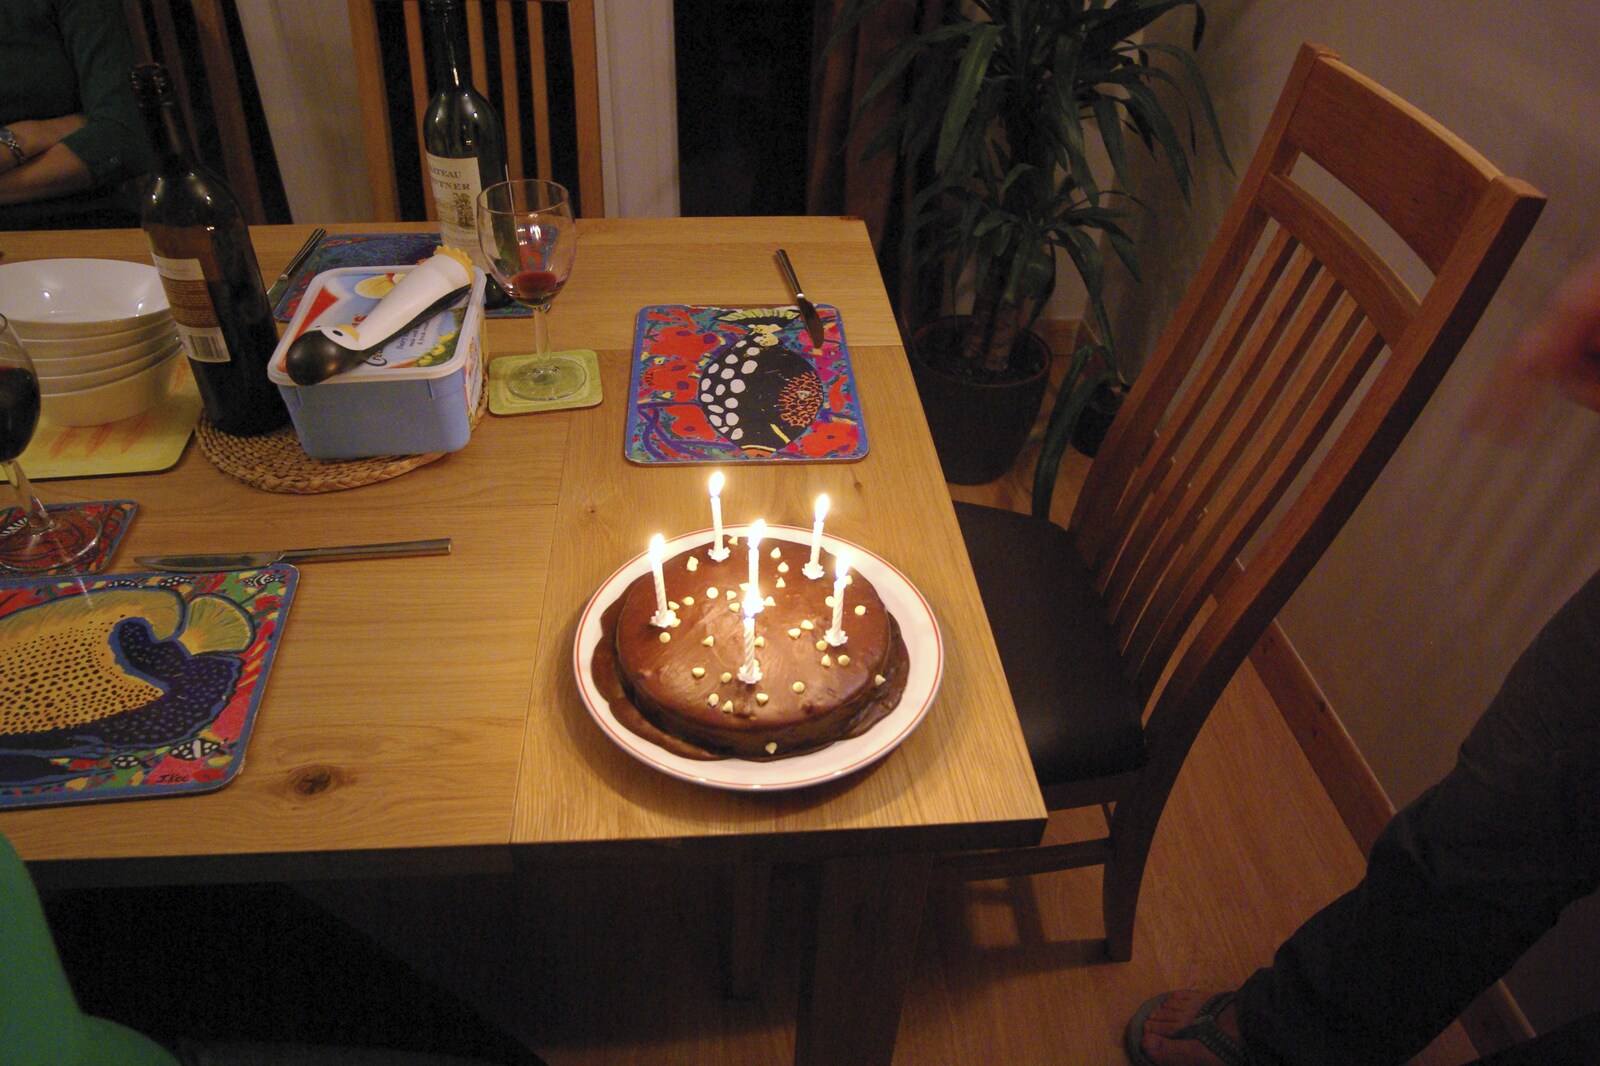 There's a cake for Caroline's birthday from Fireworks, and Dinner at Caroline and John's, Cambridge - 5th November 2007